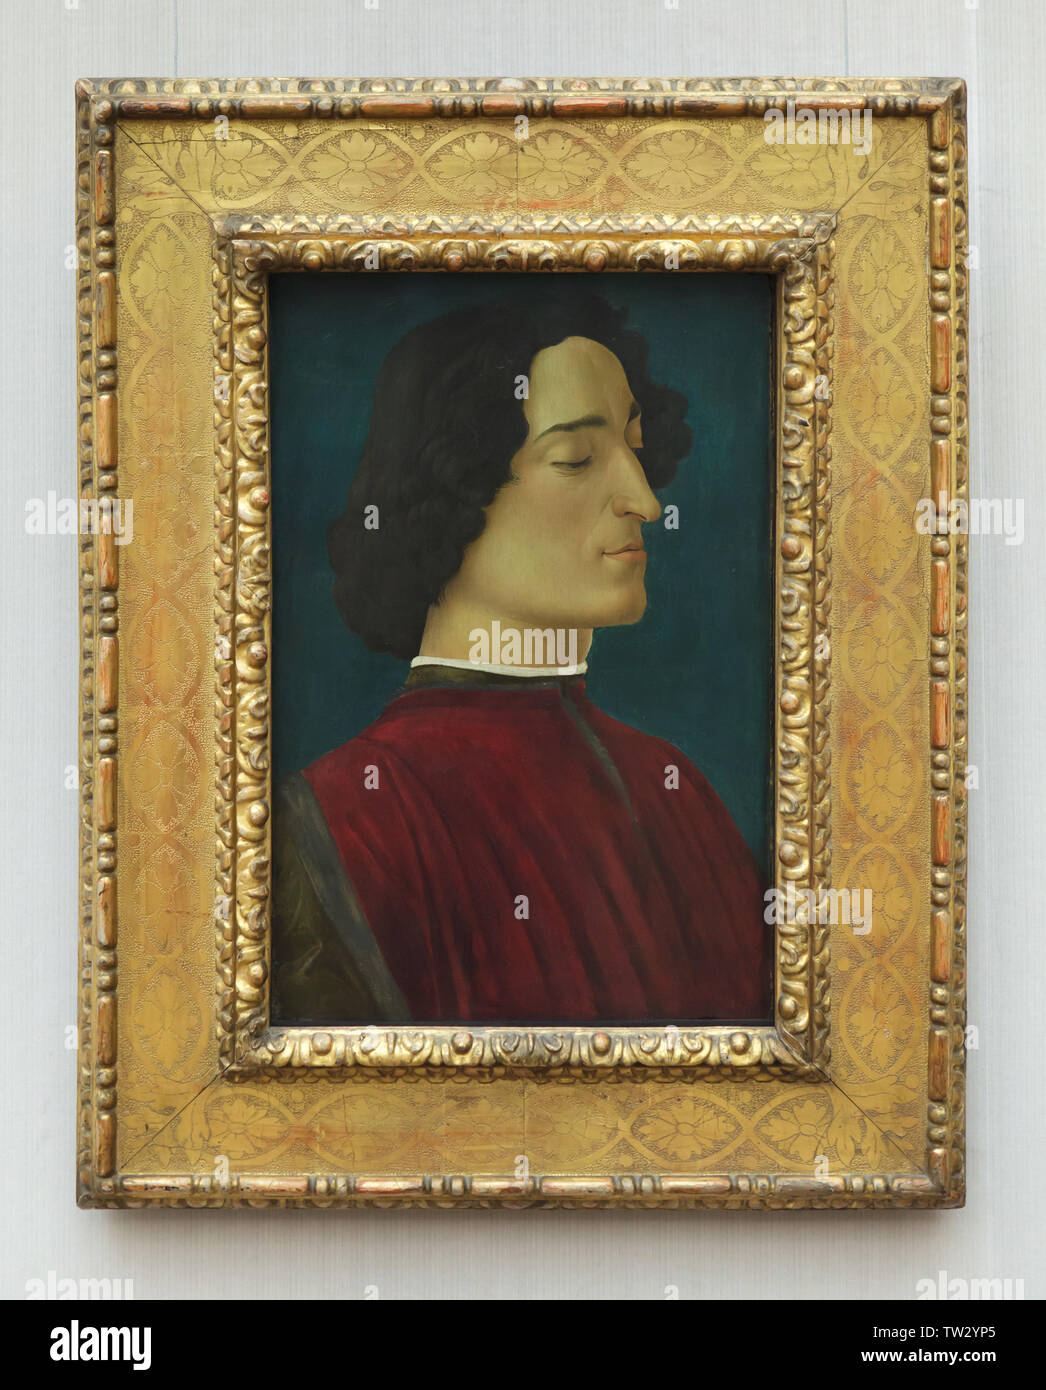 Painting 'Giuliano de' Medici' by Italian Renaissance painter Sandro Botticelli (1453-1478) on display in the Berliner Gemäldegalerie (Berlin Picture Gallery) in Berlin, Germany. Stock Photo